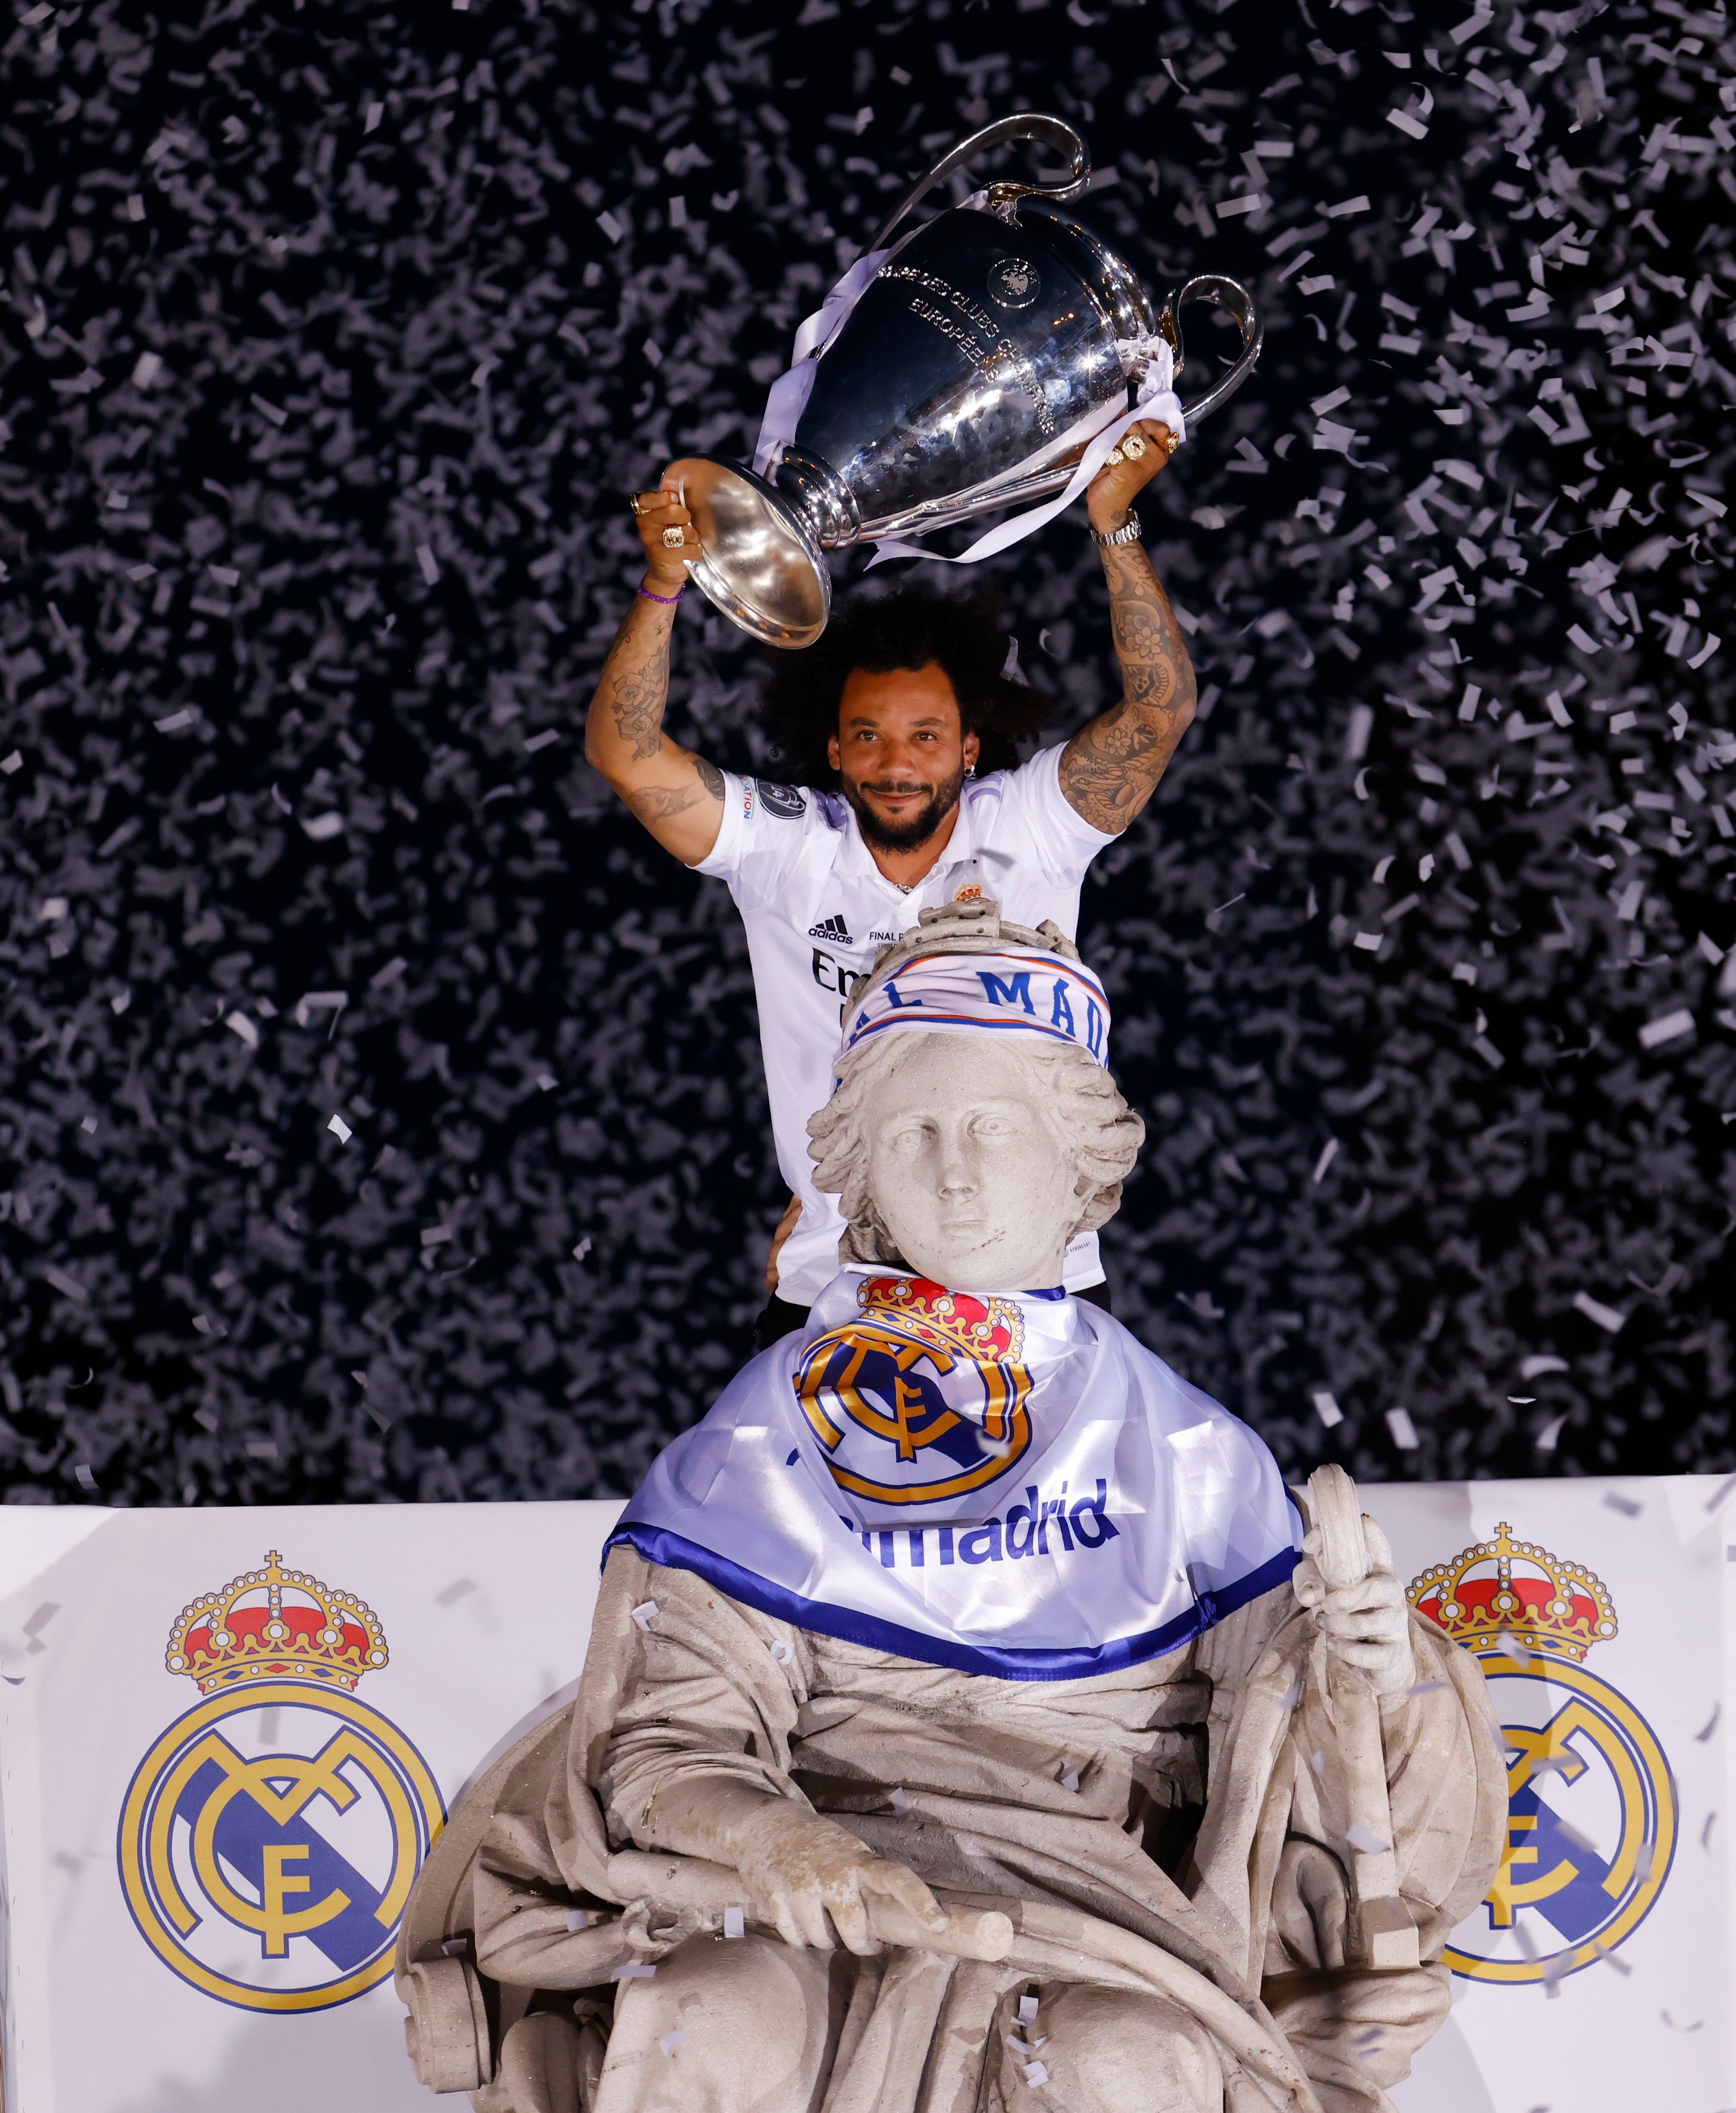 Marcelo lifting the Champions League trophy.